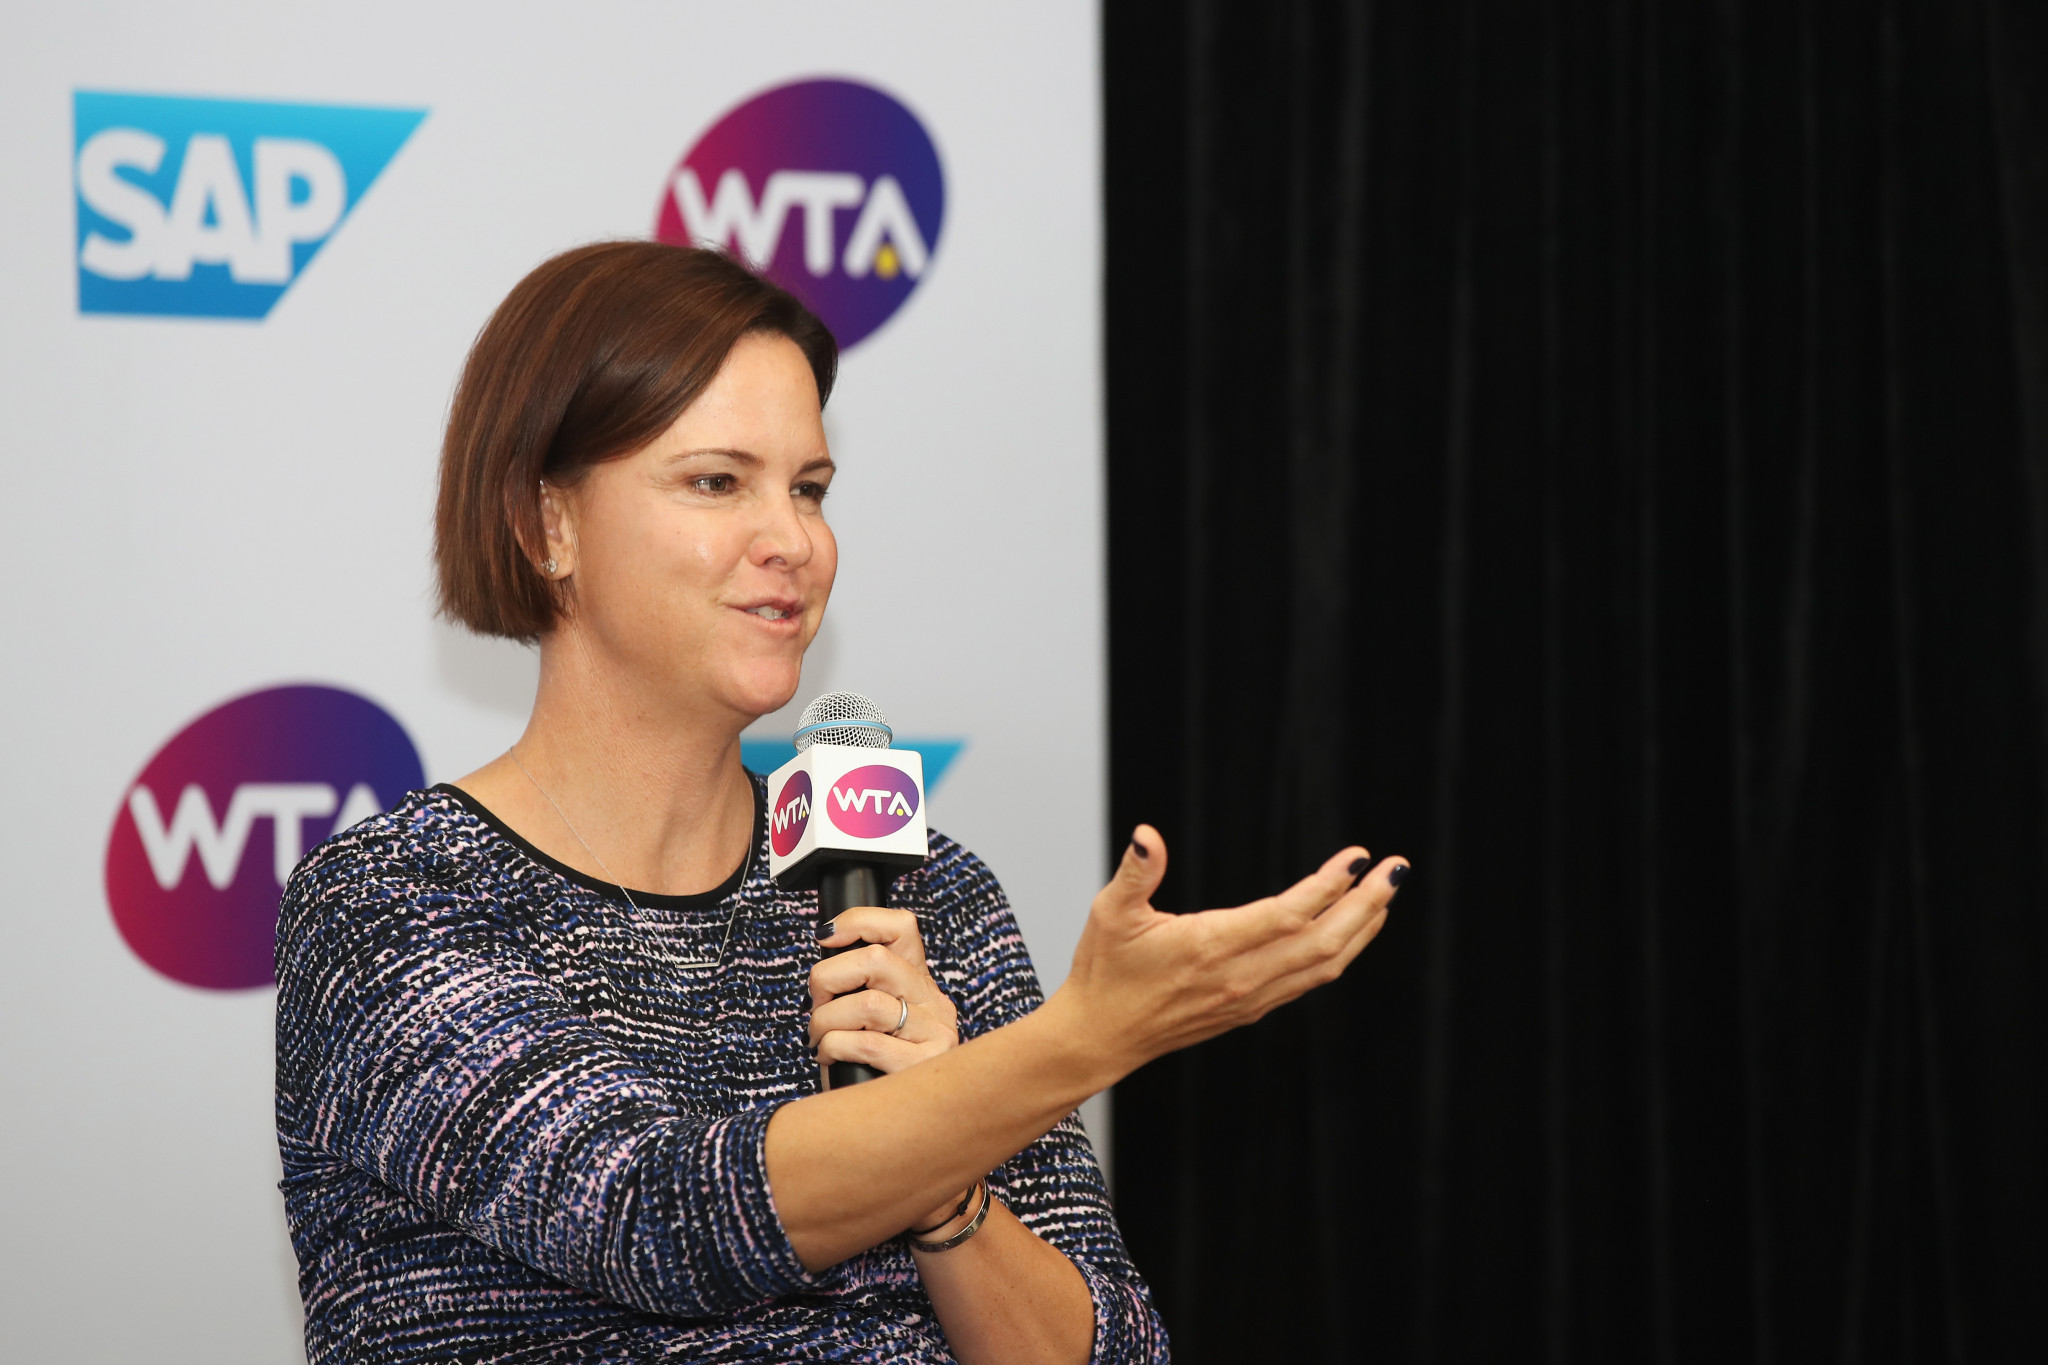 American Lindsay Davenport, who won three of tennis' four Grand Slams, will be profiled in a later episode ©Getty Images